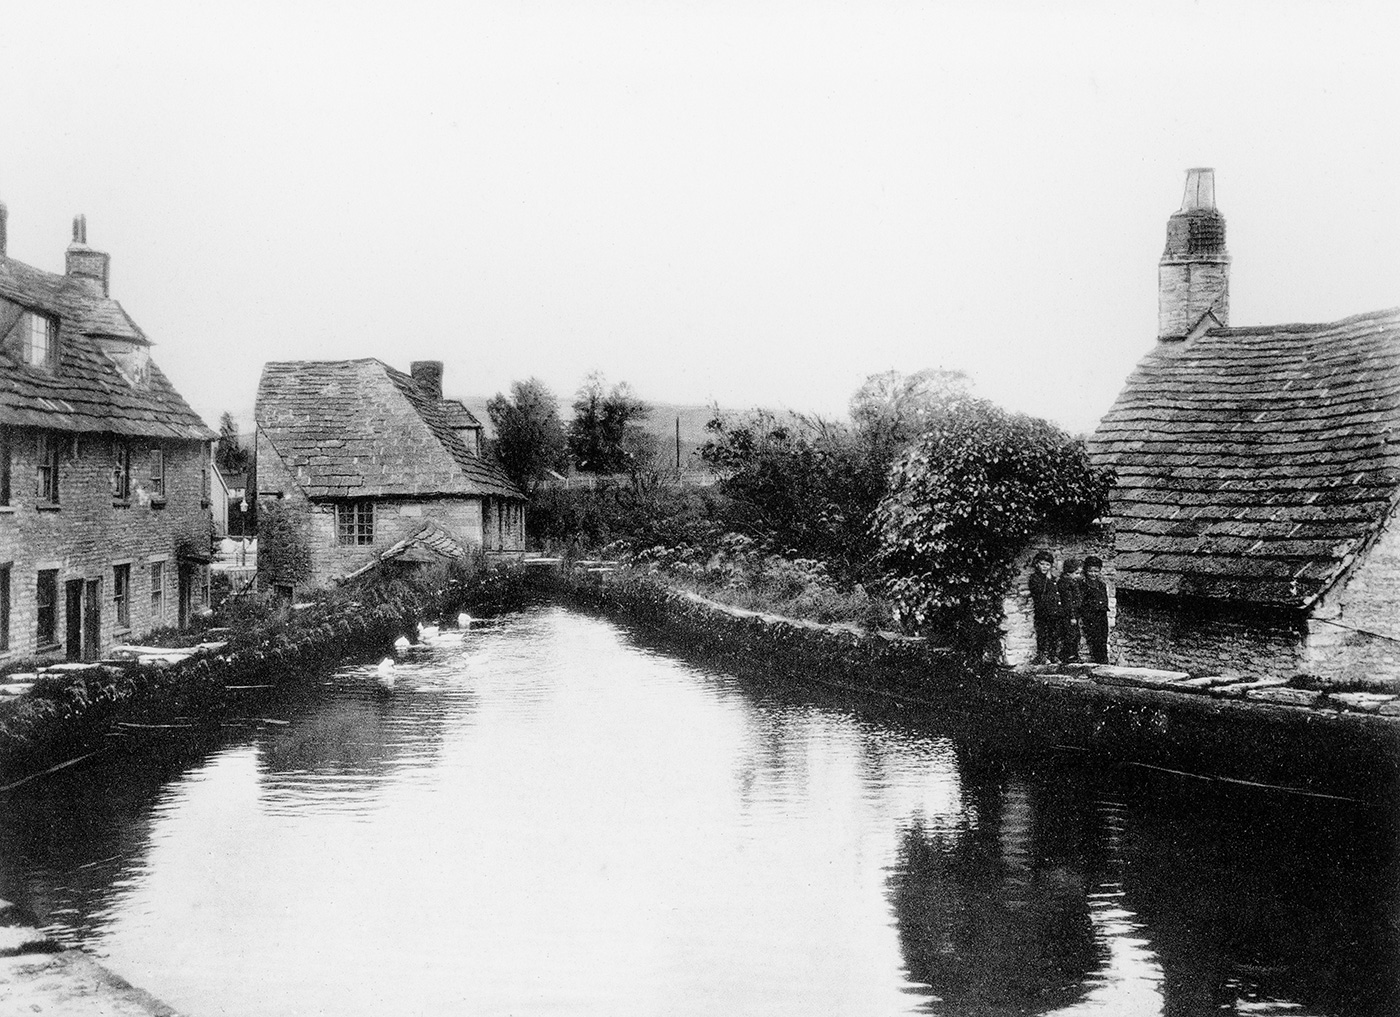 The Mill Pond with Ducks and Children